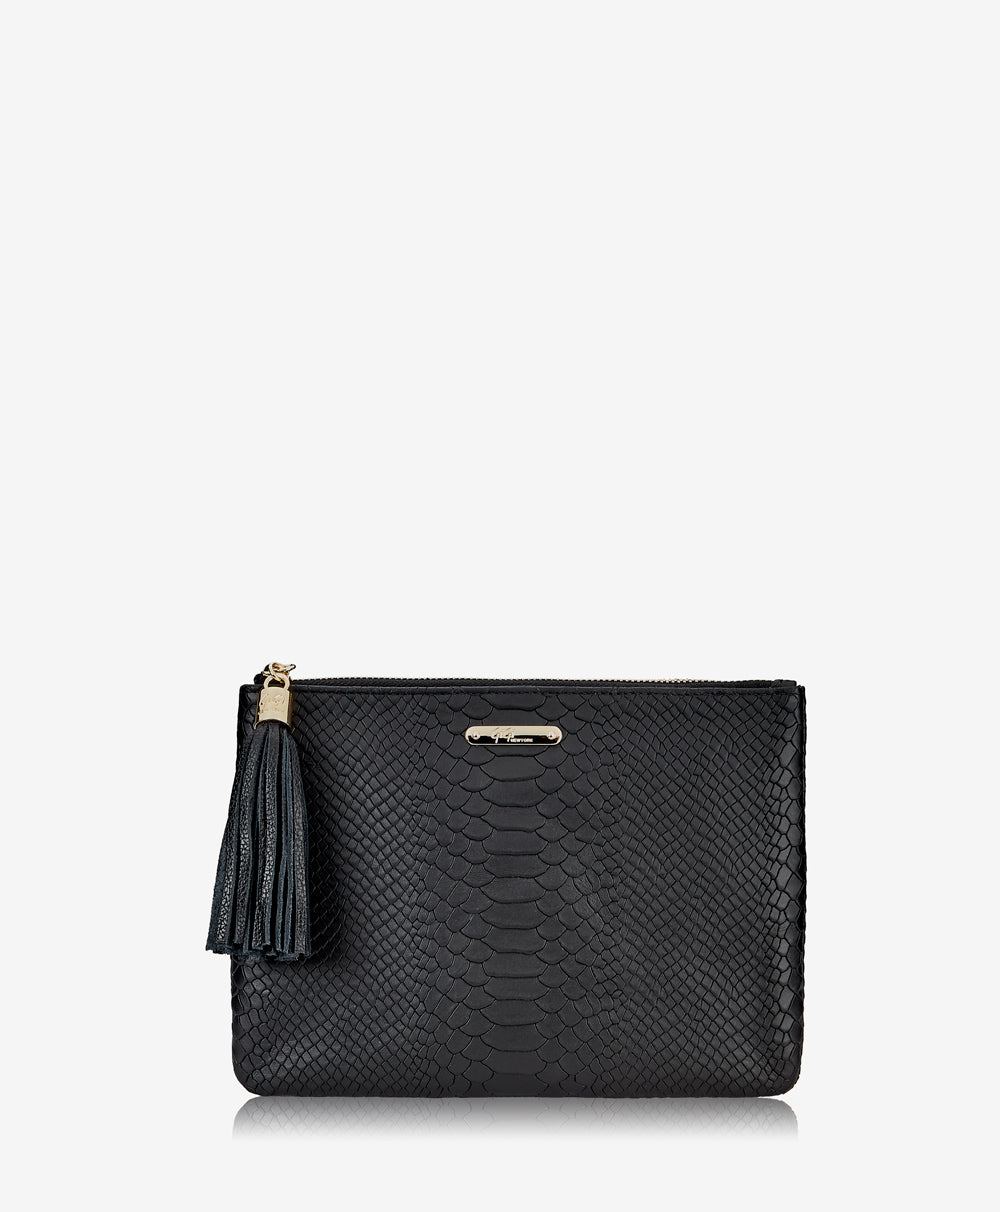 GiGi New York All In One Clutch Bag Black Embossed Python Leather